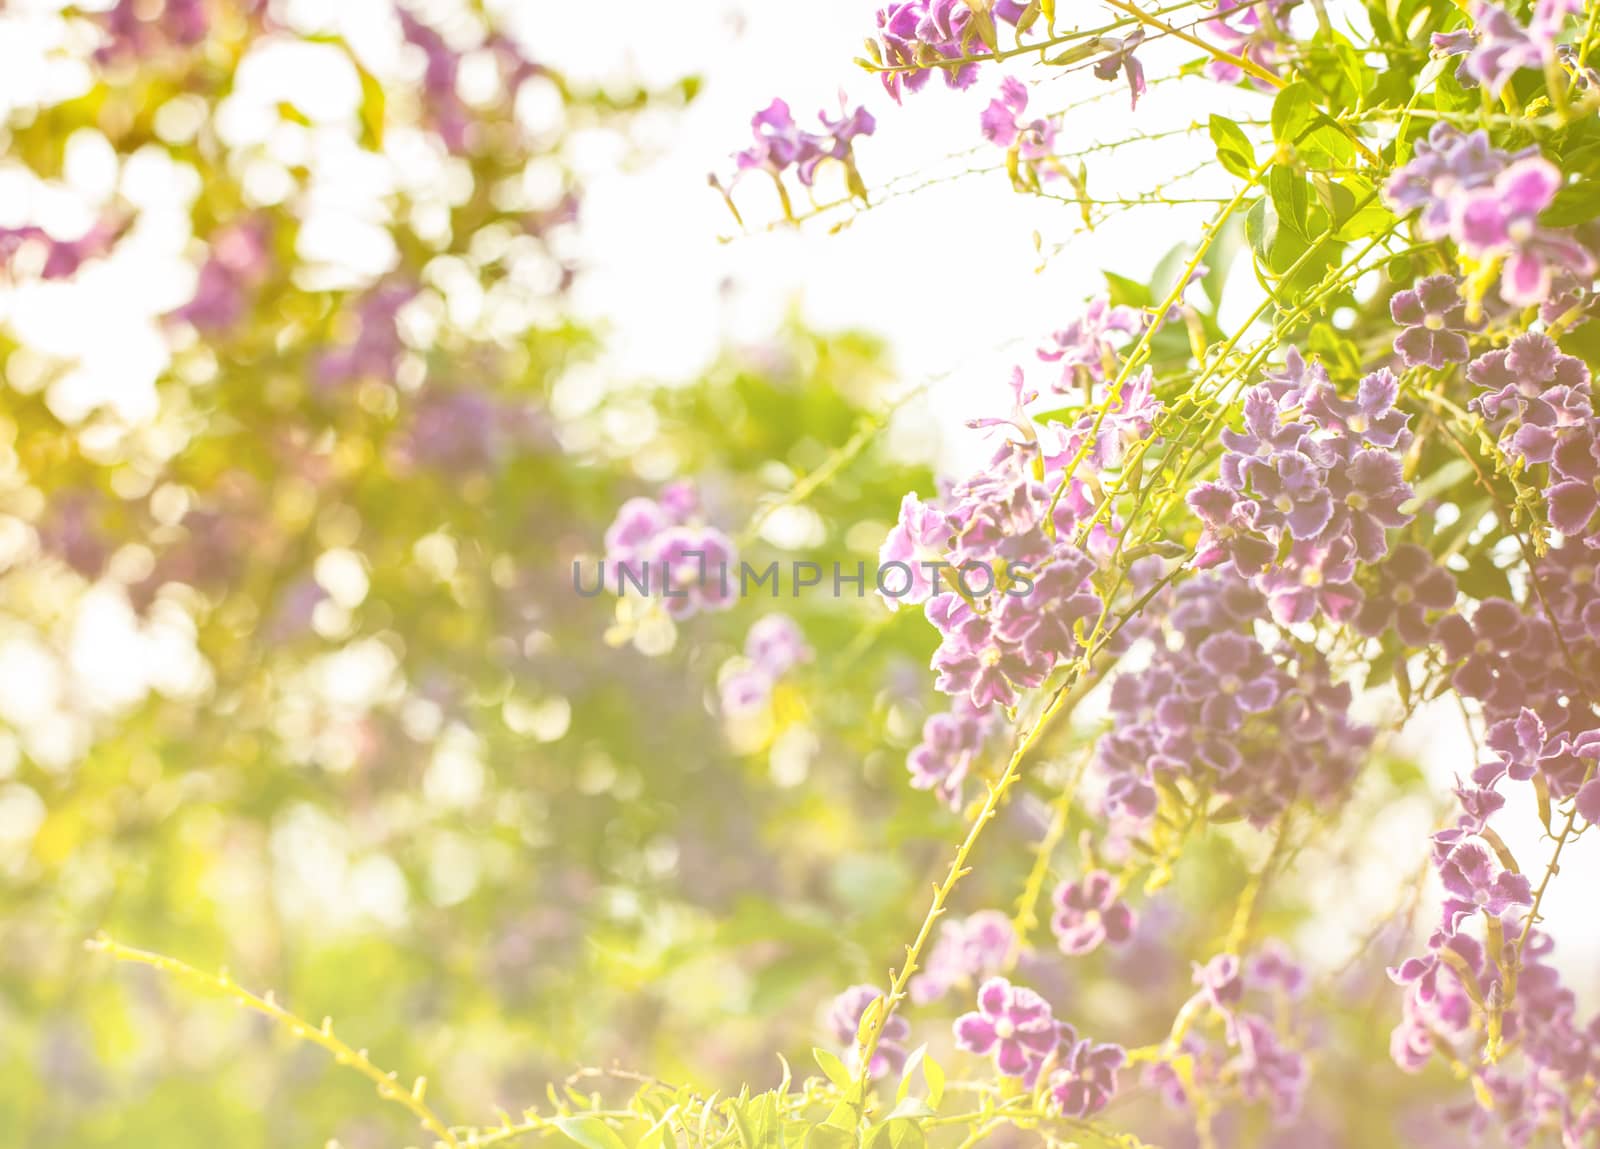 Beautiful flower, beautiful nature with colorful and blur background